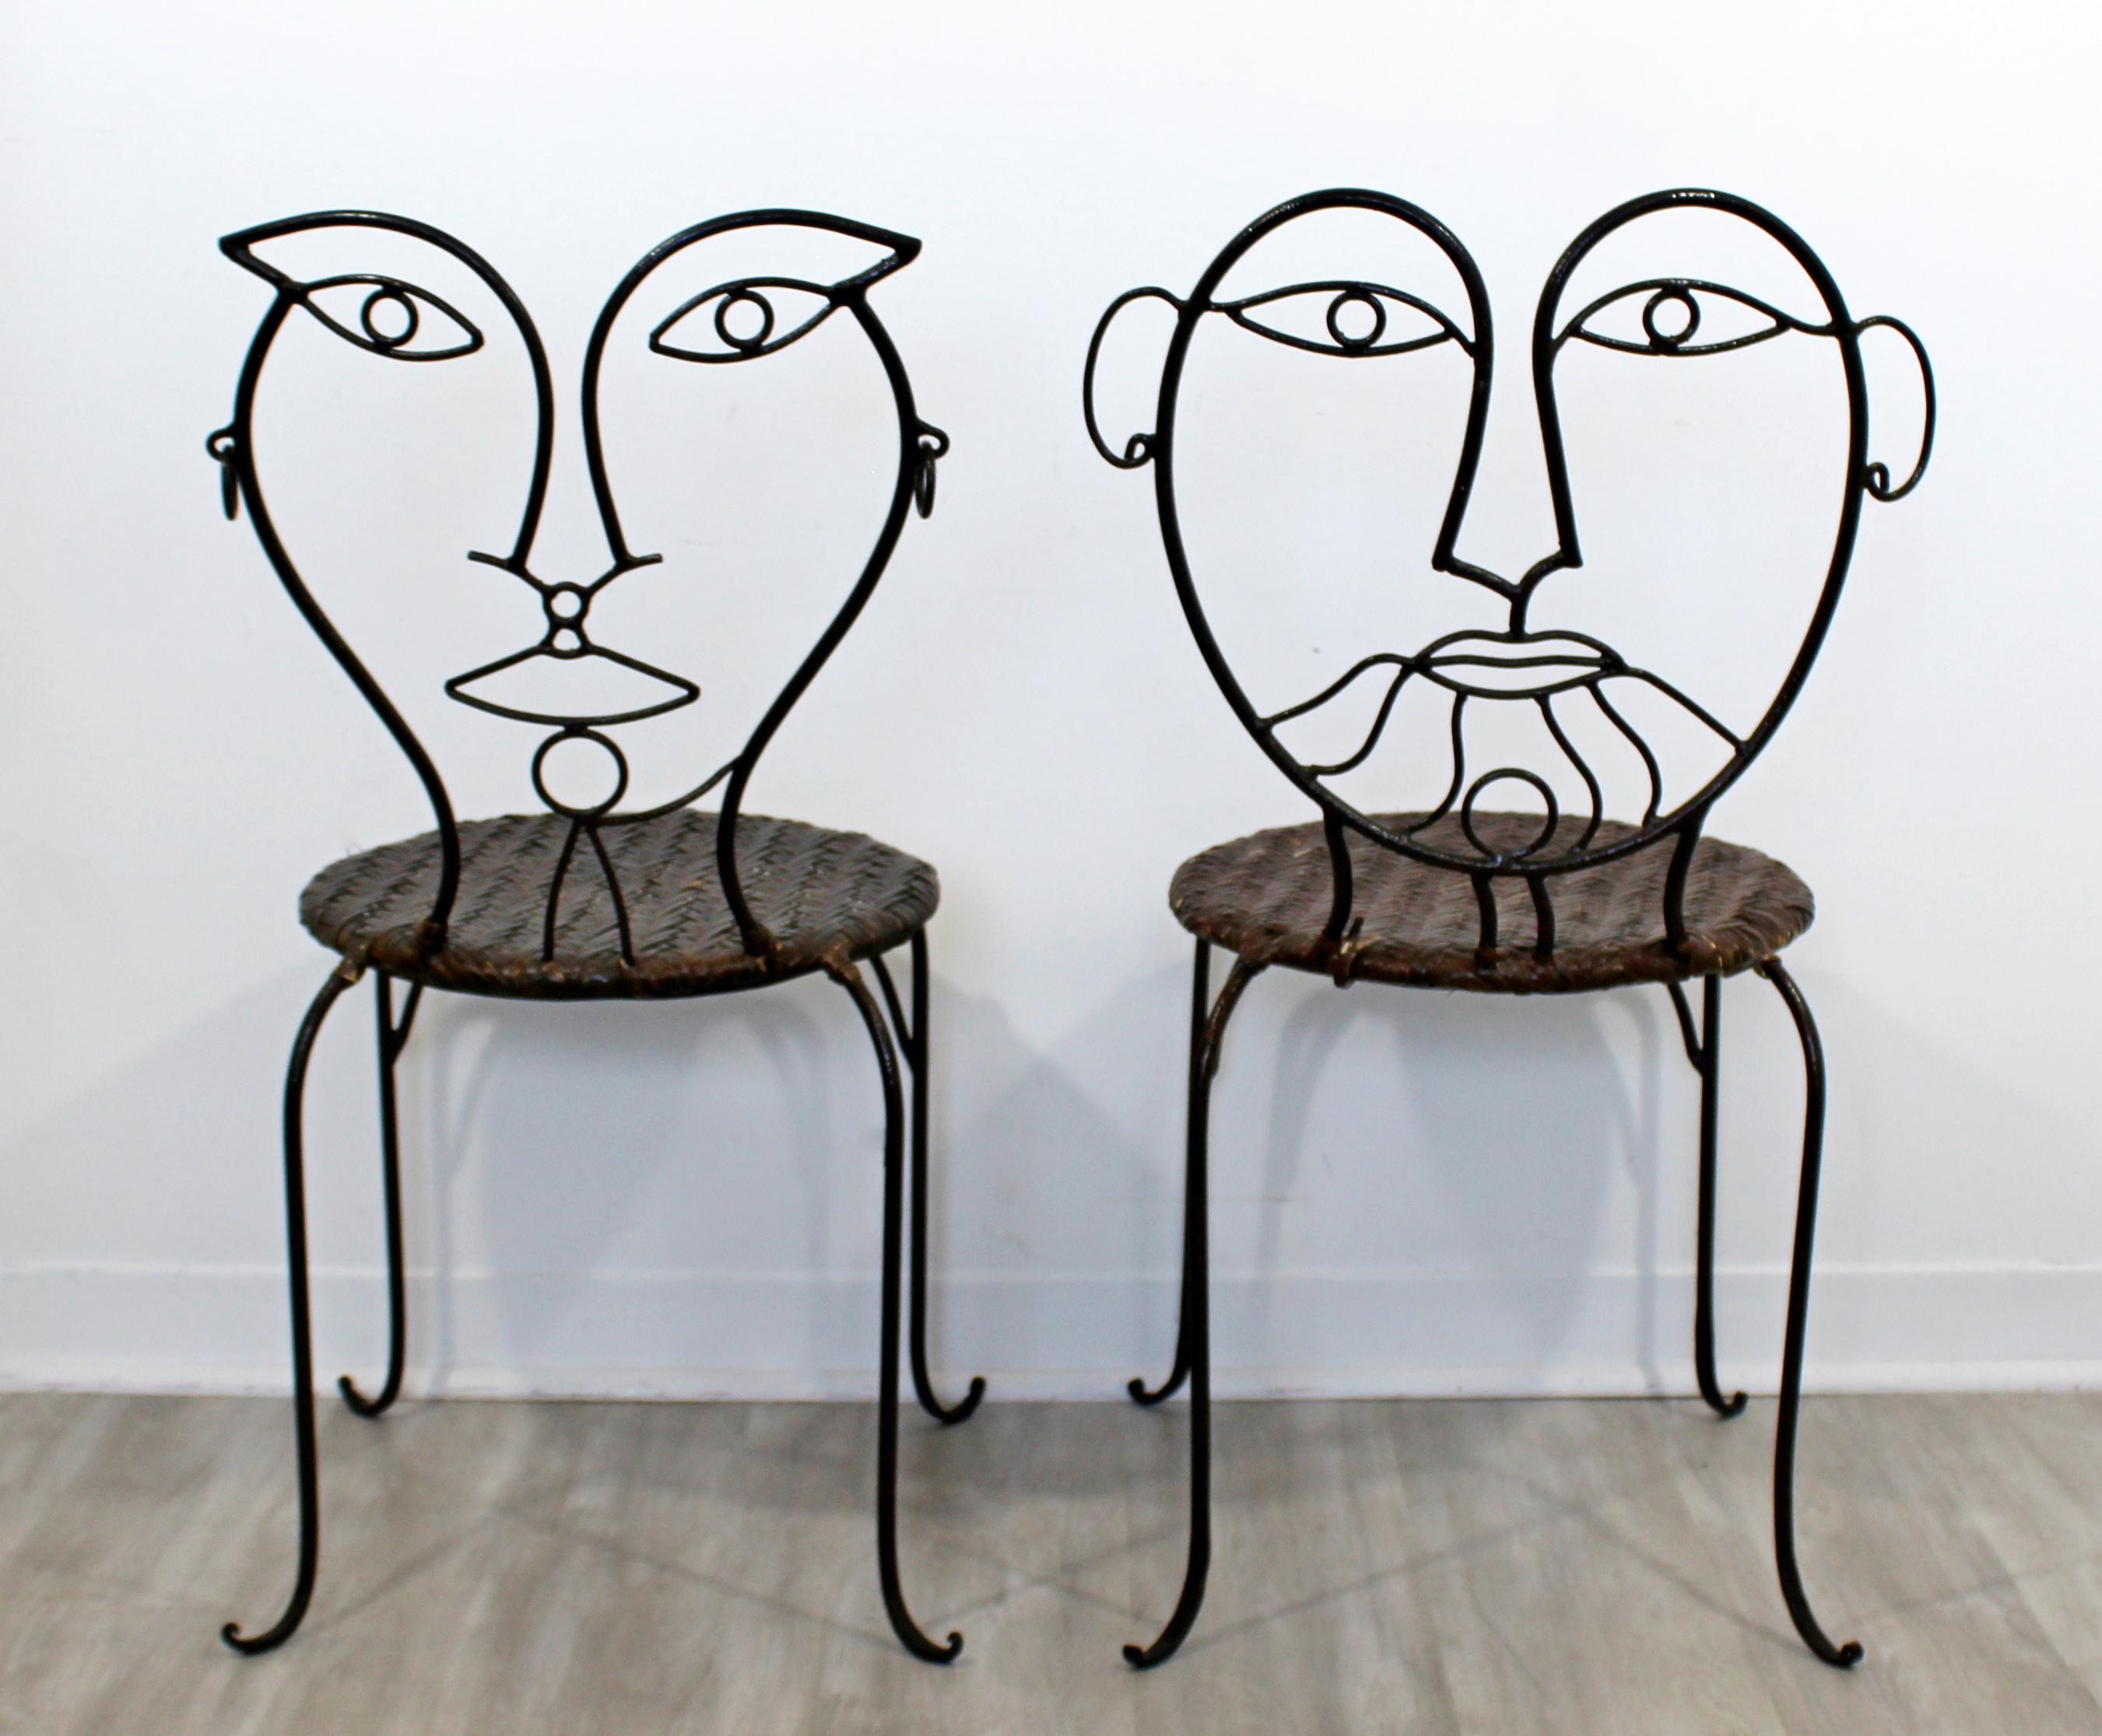 Contemporary Modern Pair of Wrought Iron and Rattan Cafe Art Chairs Faces, 1990s 2